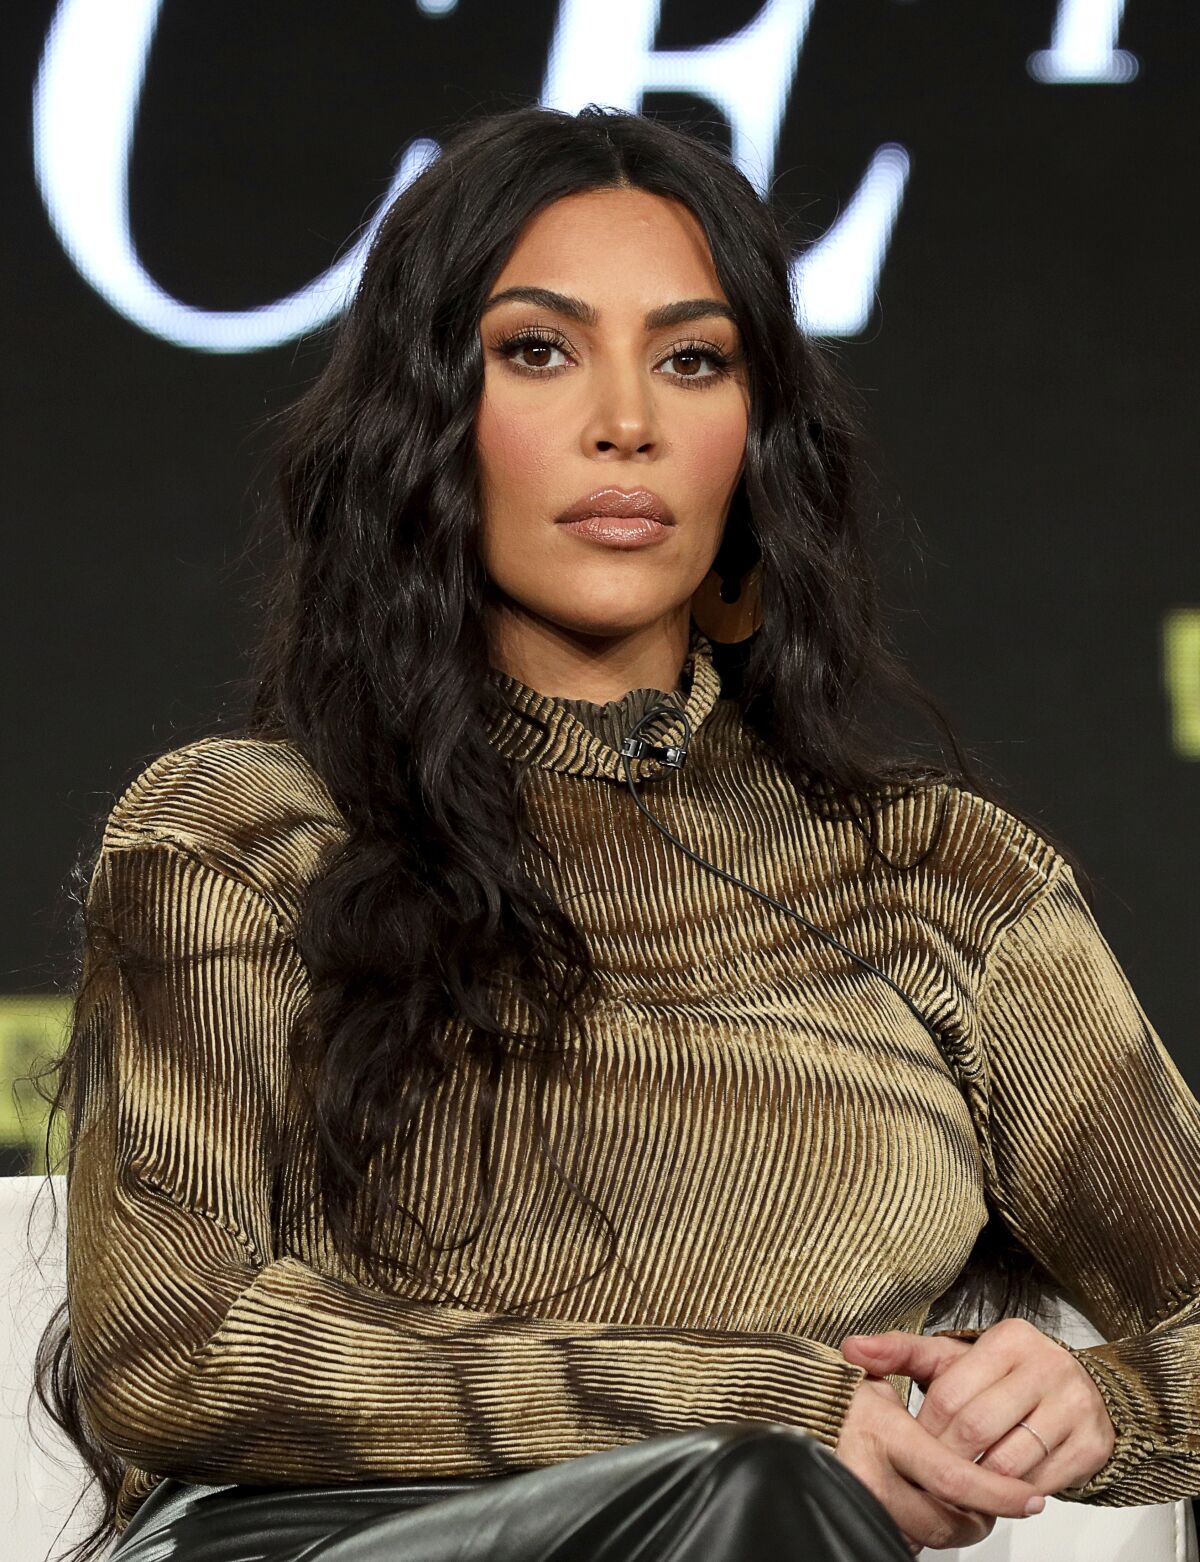 FILE - In this Saturday, Jan. 18, 2020 file photo, Kim Kardashian West speaks at the "Kim Kardashian West: The Justice Project" panel during the Oxygen TCA 2020 Winter Press Tour at the Langham Huntington, in Pasadena, Calif. Celebrities including Kim Kardashian West, Katy Perry and Leonardo DiCaprio are taking part in a 24-hour “freeze” Wednesday, Sept. 16, 2020 on Instagram to protest against the failure of the social media platform's parent company, Facebook, to tackle misinformation and hateful content. (Photo by Willy Sanjuan/Invision/AP, File)